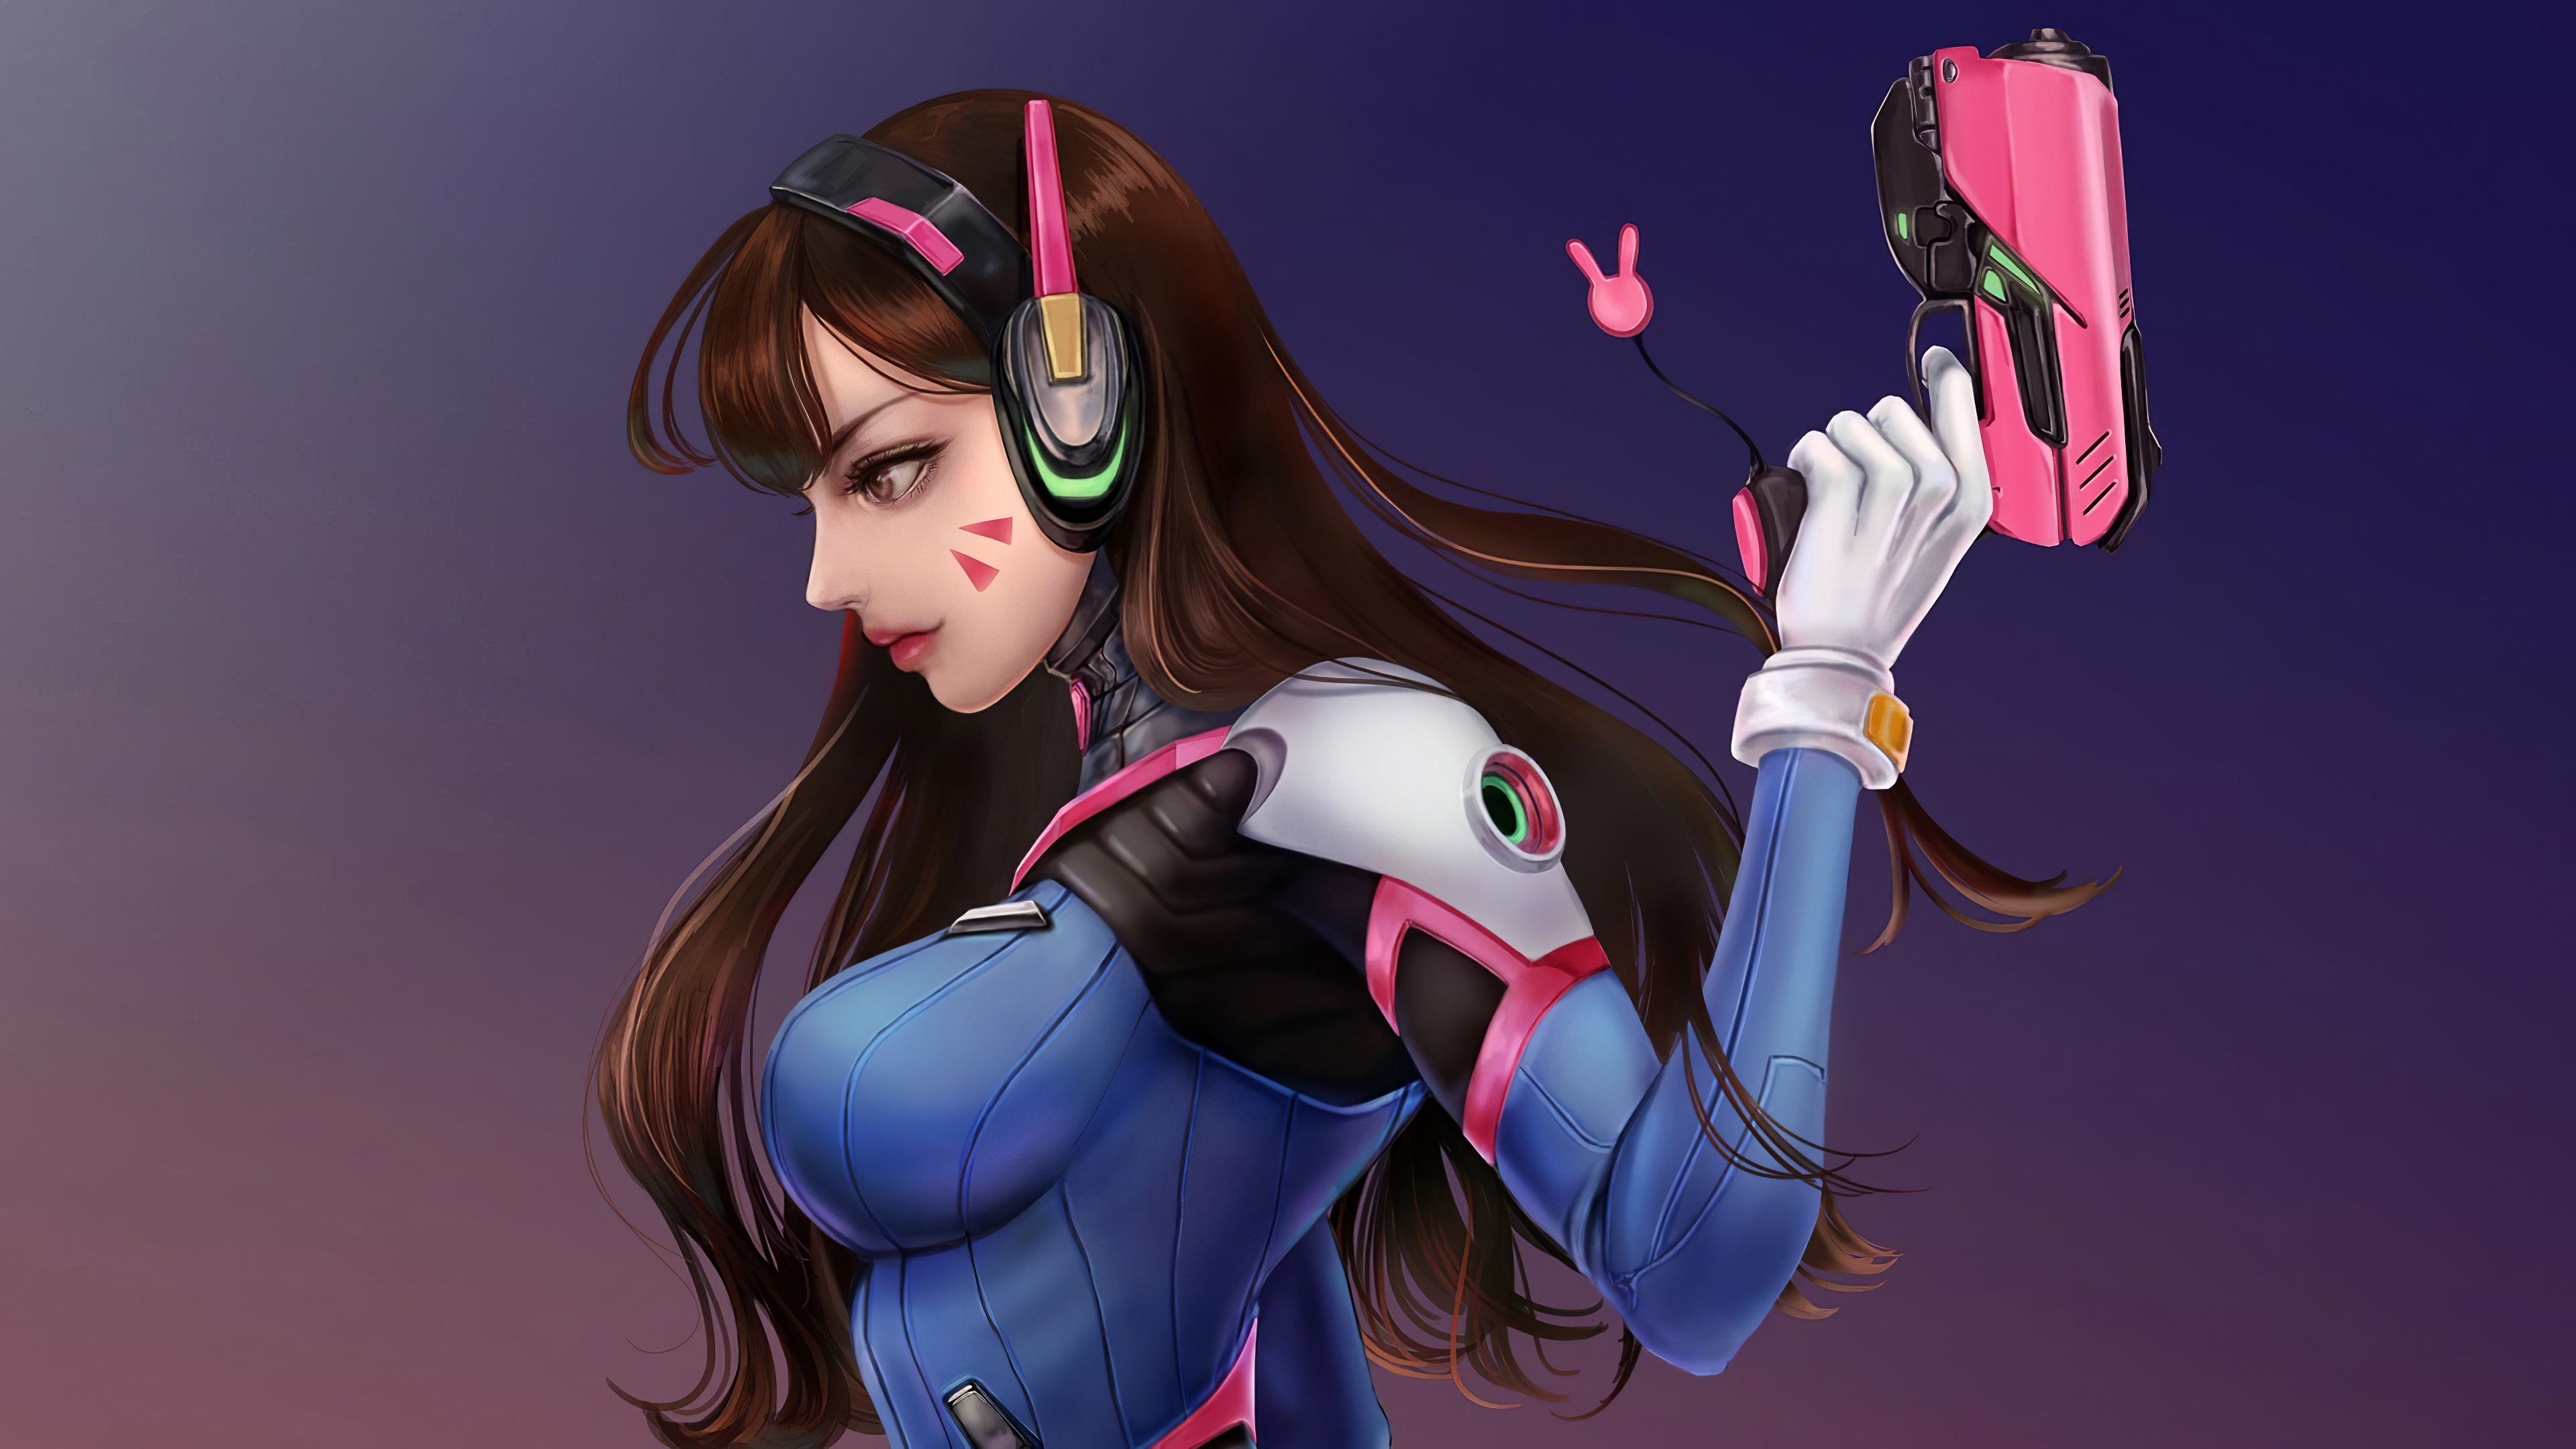 Girl With Weapon Game Characters D Va Overwatch Overwatch 3840x2160